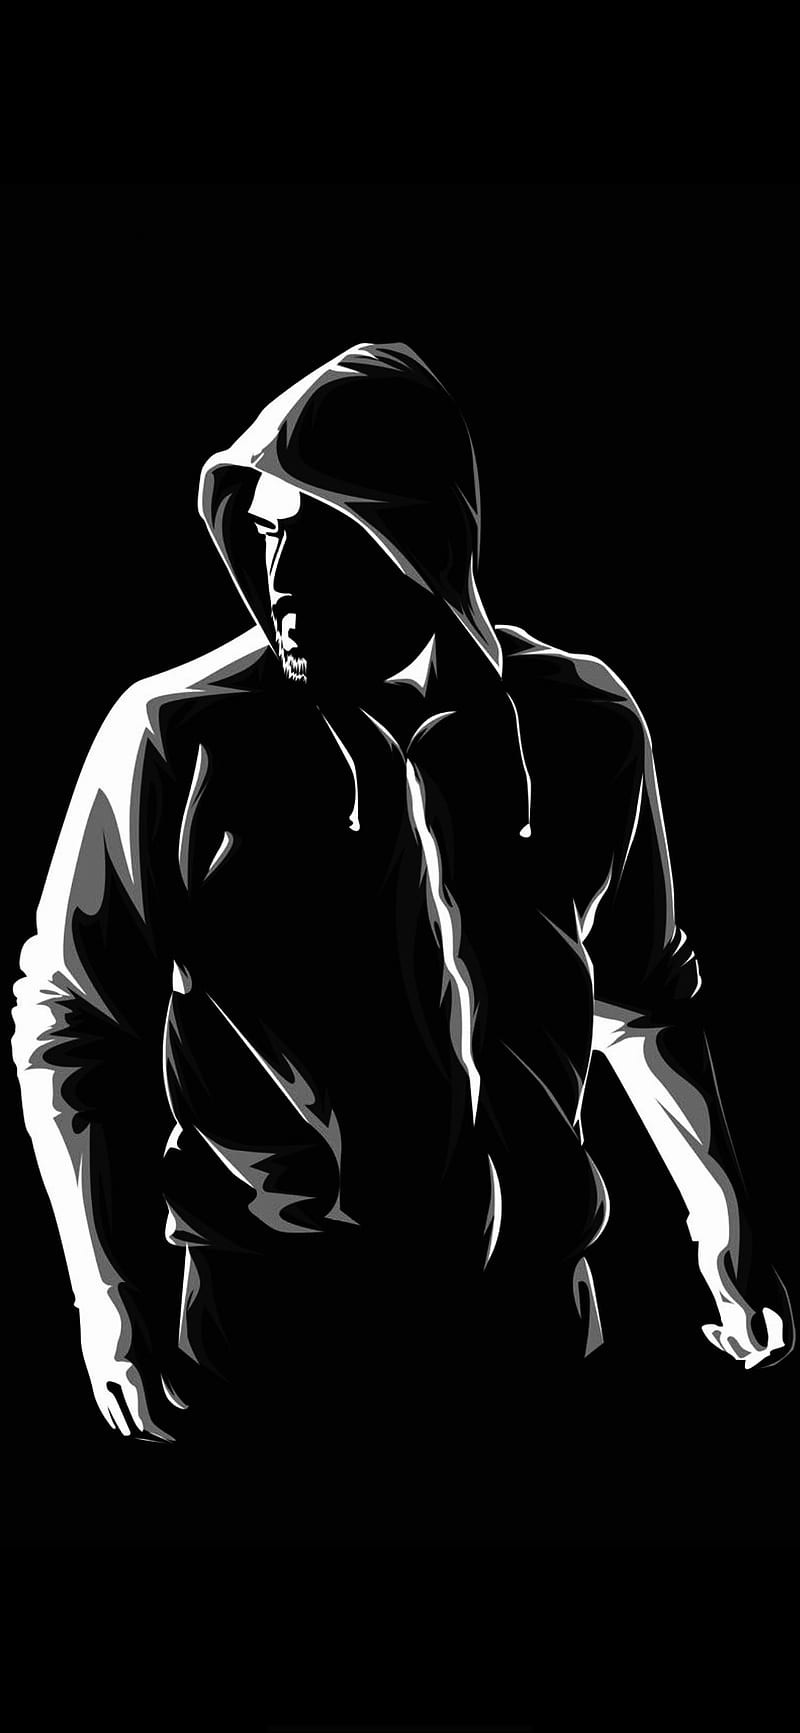 Thala Ajith Kumar Wallpaper  Actors illustration Comedy pictures Animated  love images